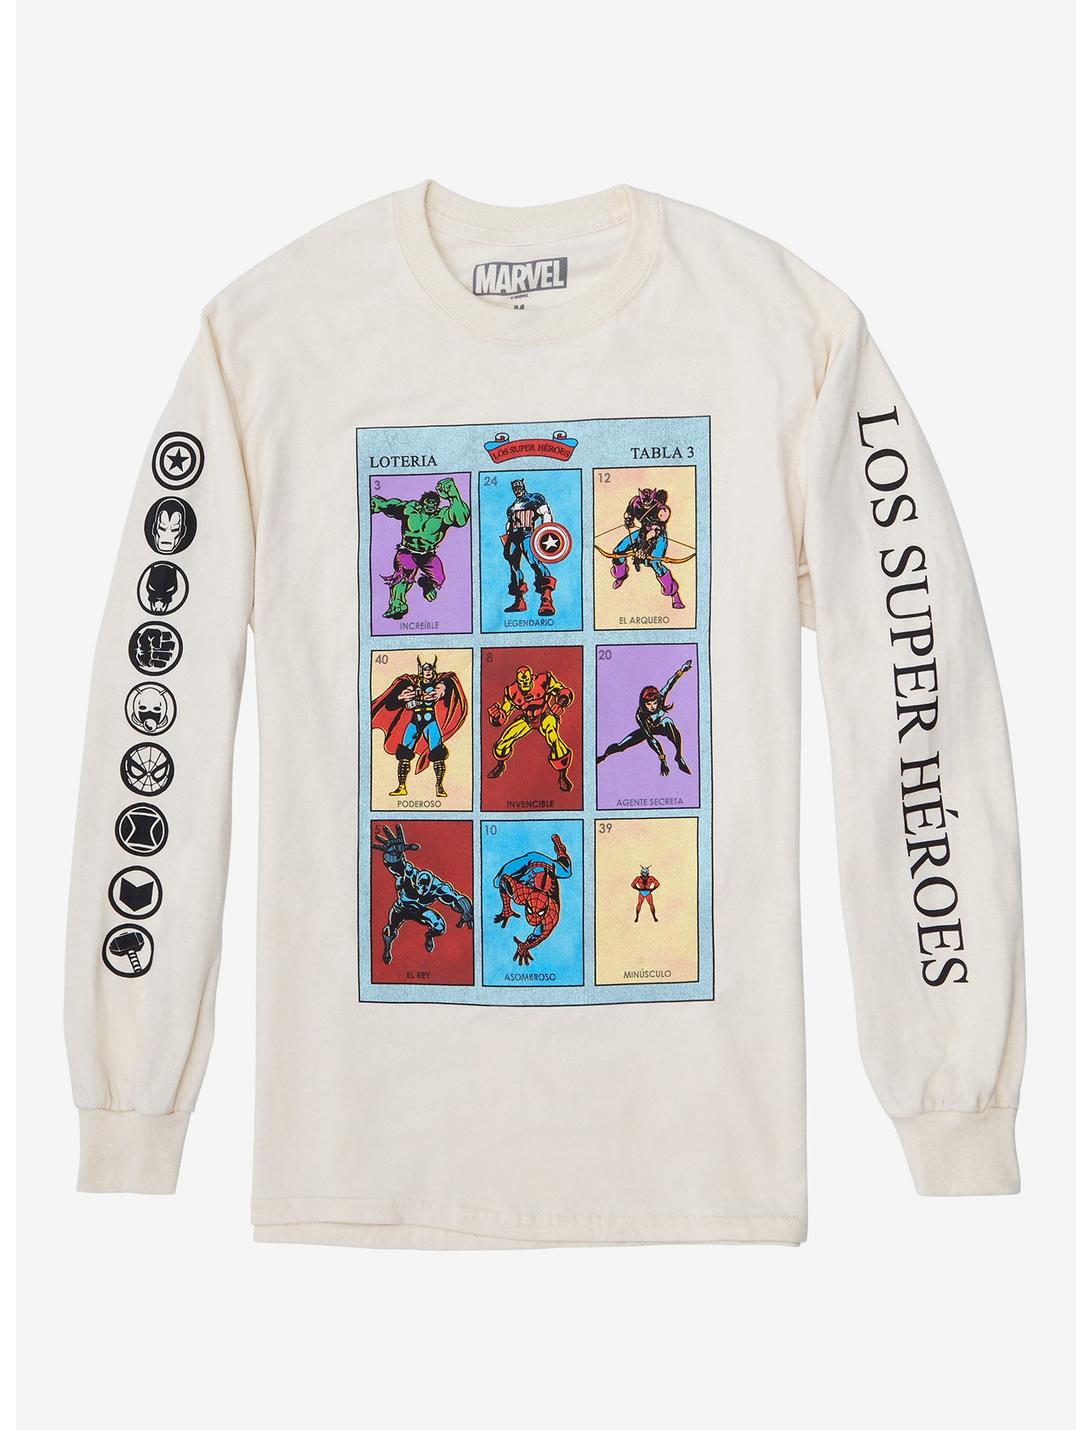 Marvel Avengers Lotería Long Sleeve T-Shirt - BoxLunch Exclusive, , hi-res